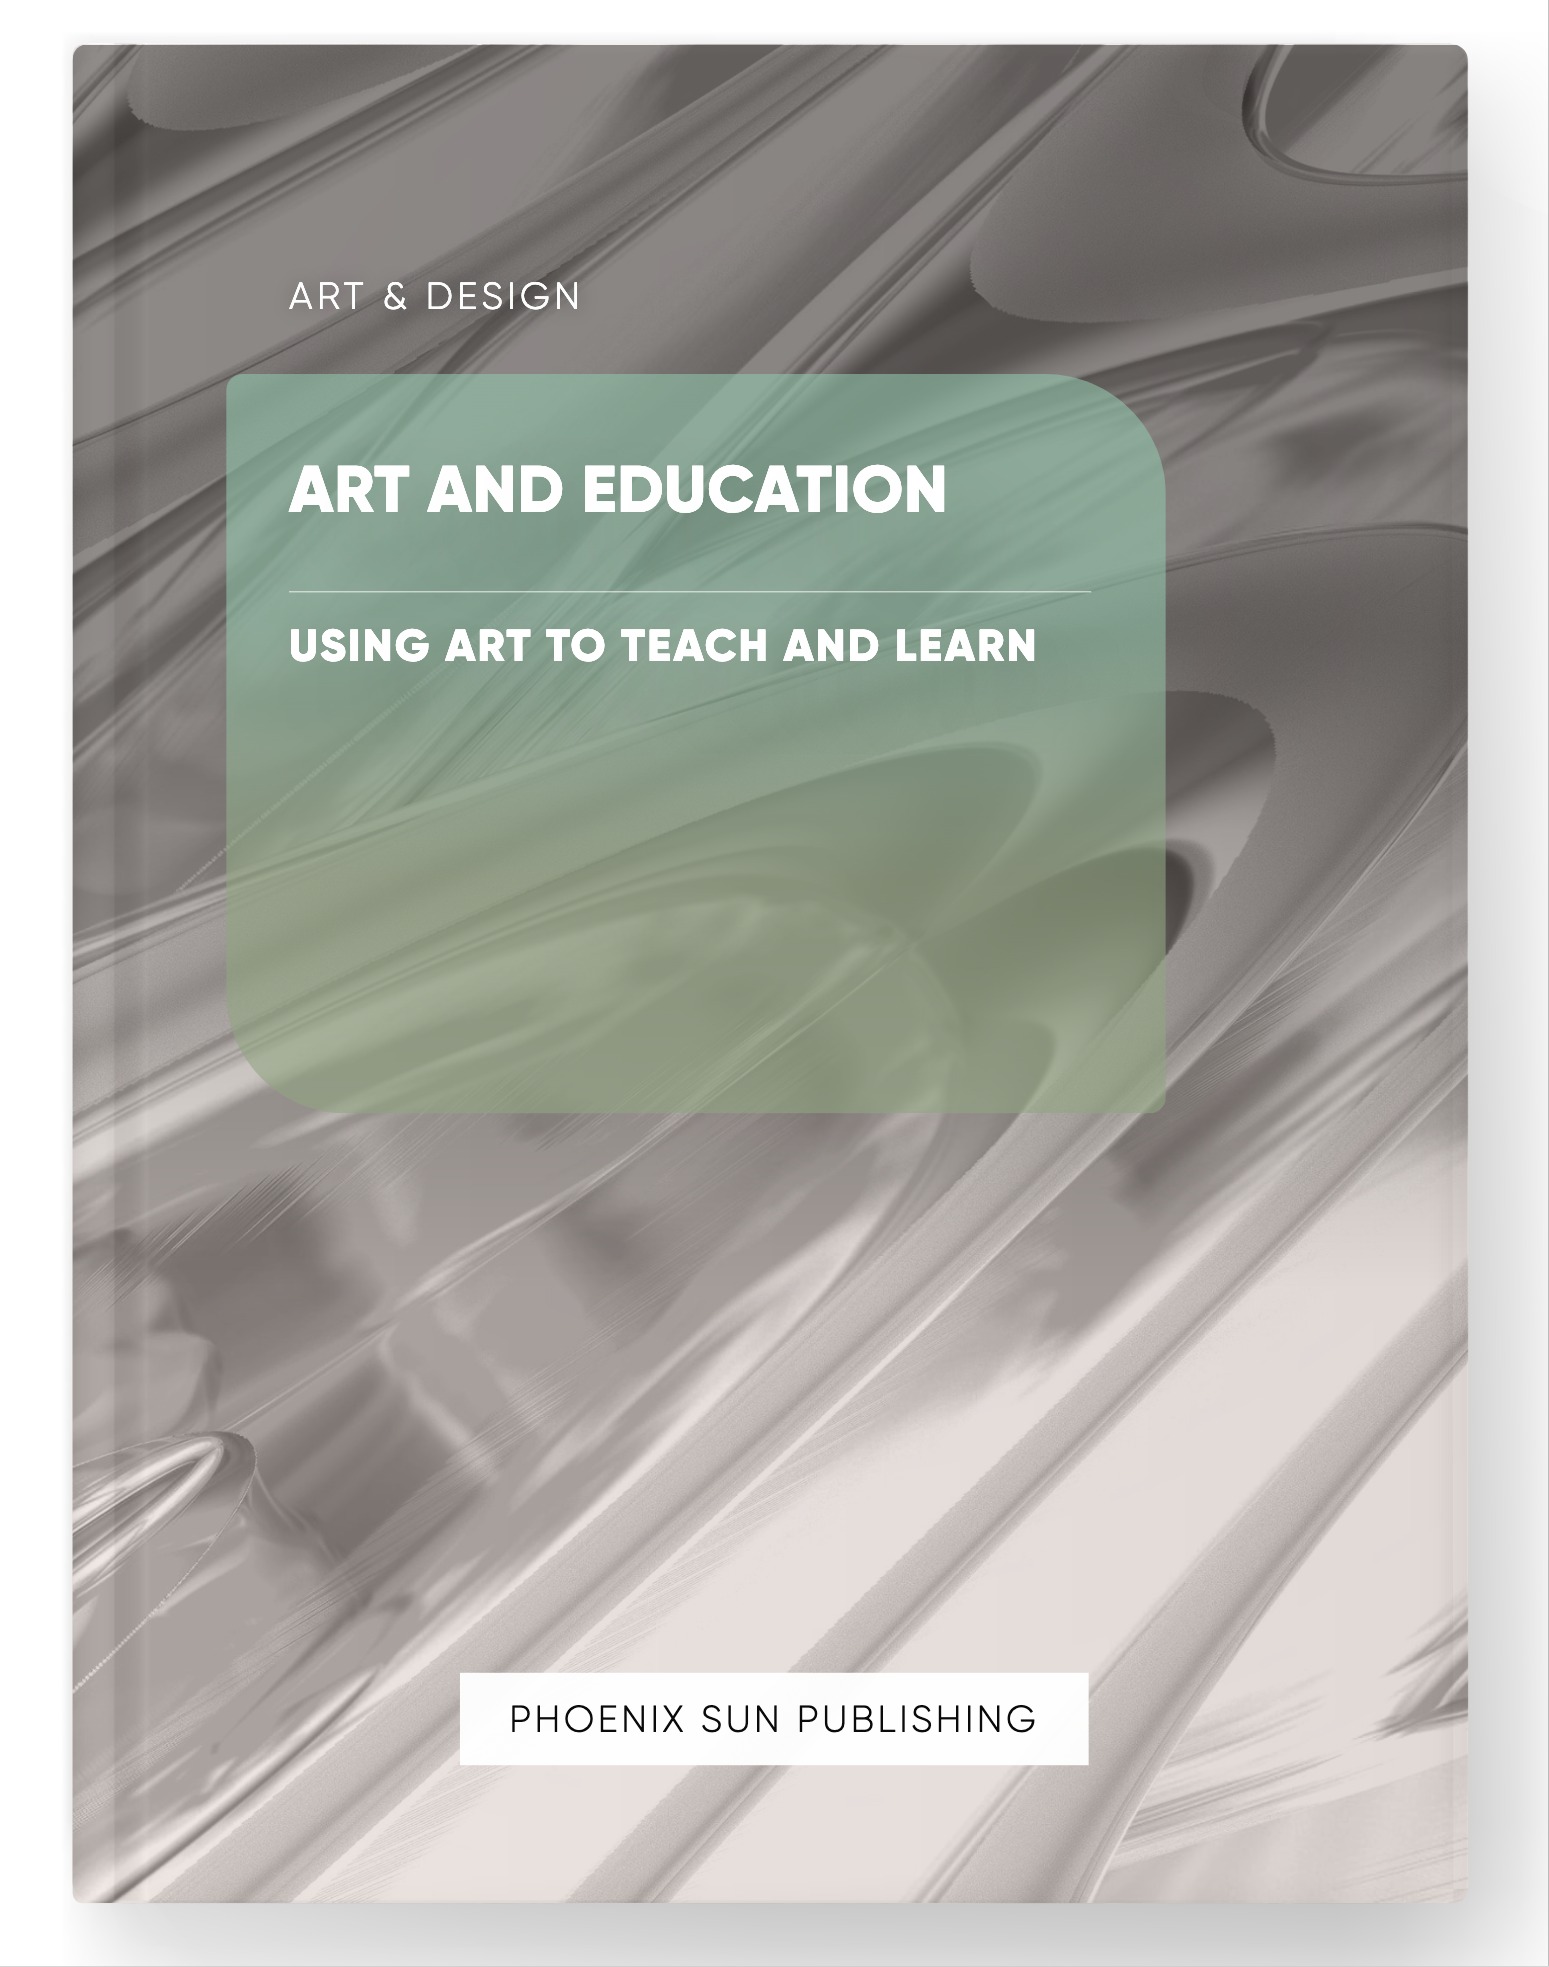 Art and Education – Using Art to Teach and Learn